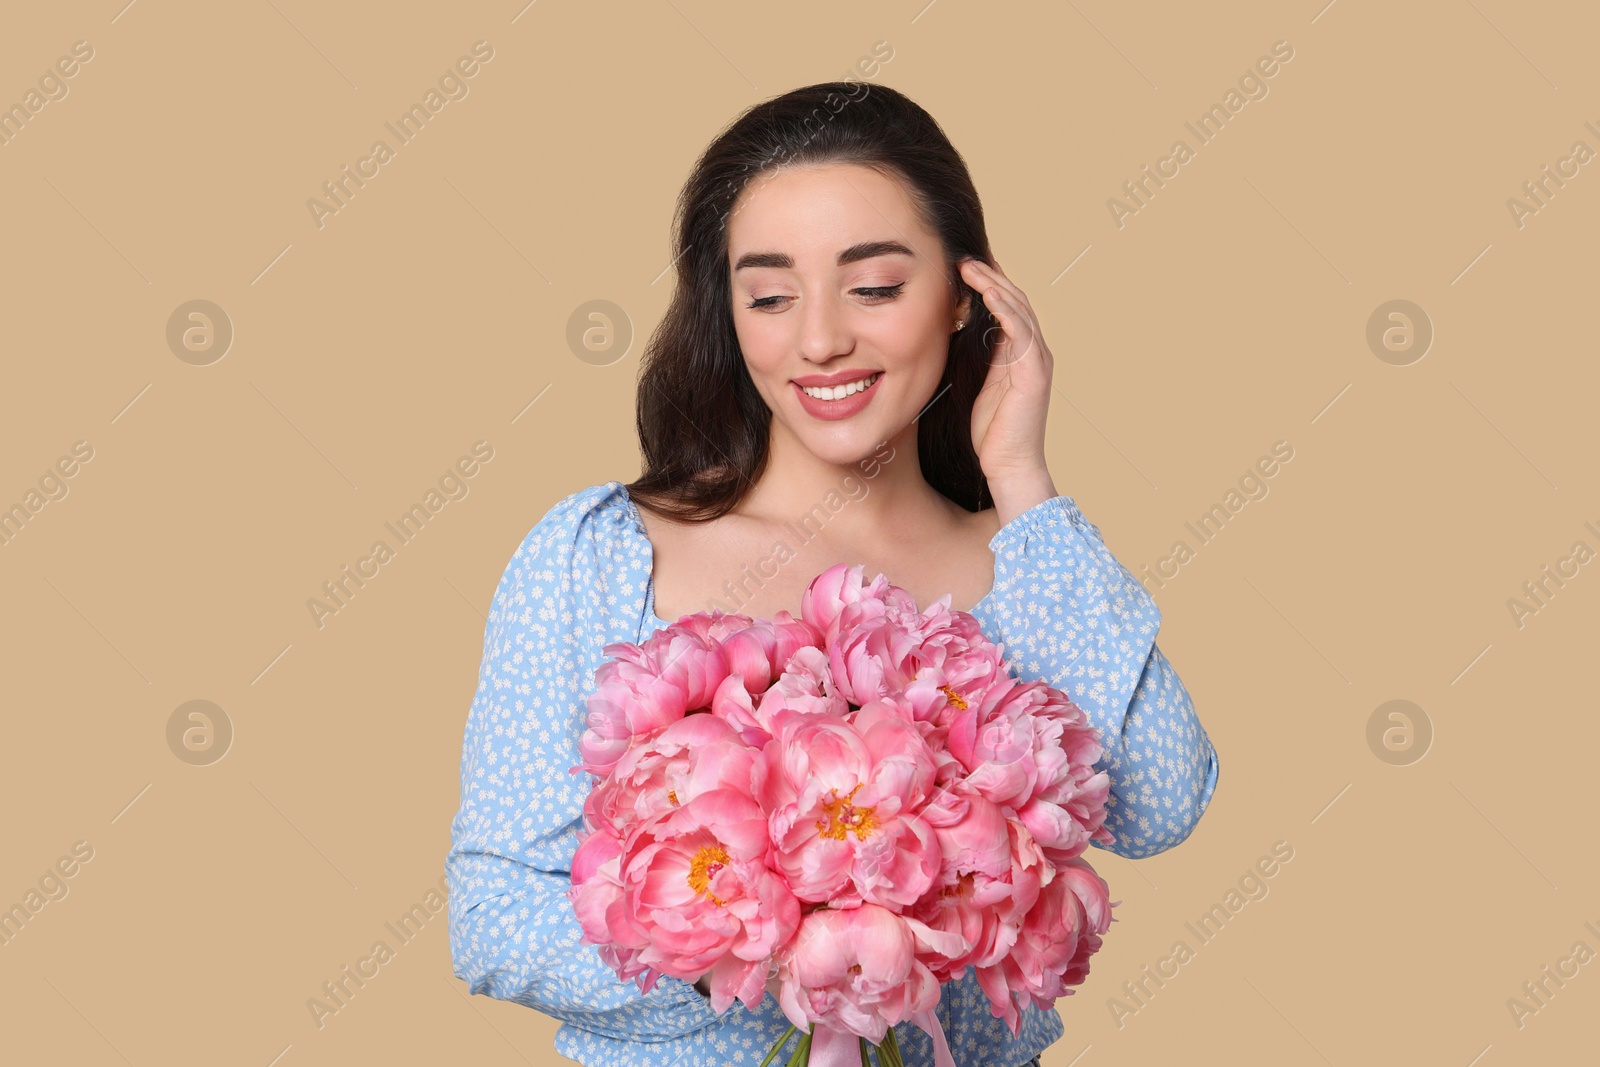 Photo of Beautiful young woman with bouquet of pink peonies on beige background